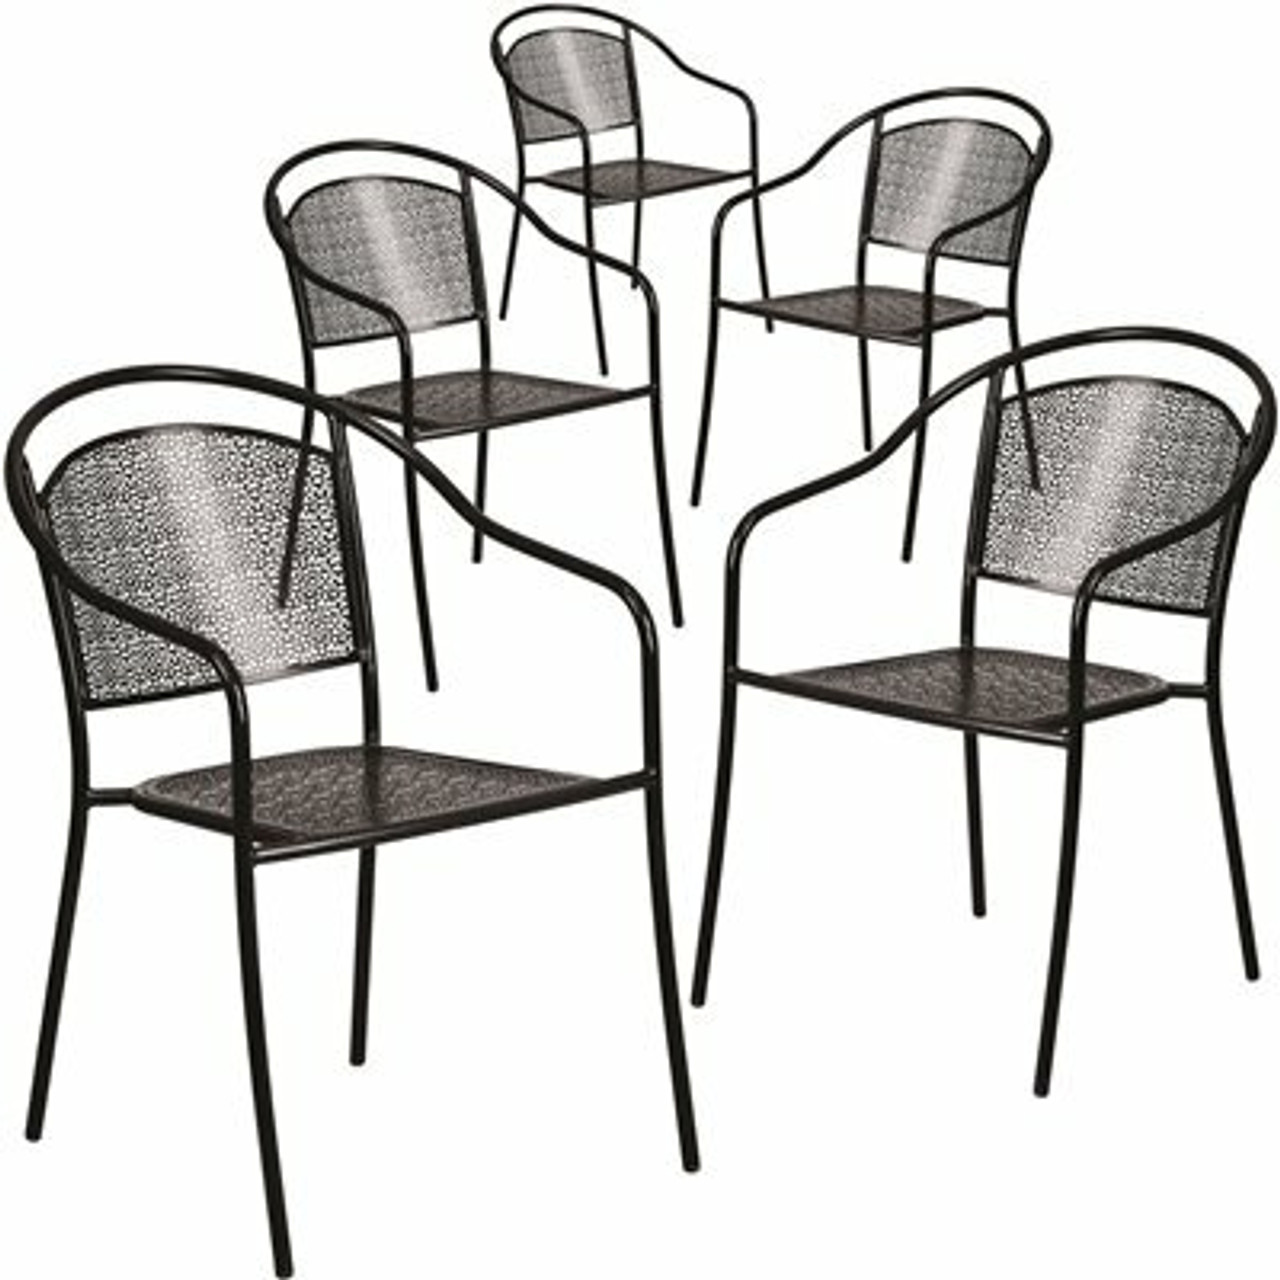 Carnegy Avenue Stackable Metal Outdoor Dining Chair In Black (Set Of 5) - 311287411